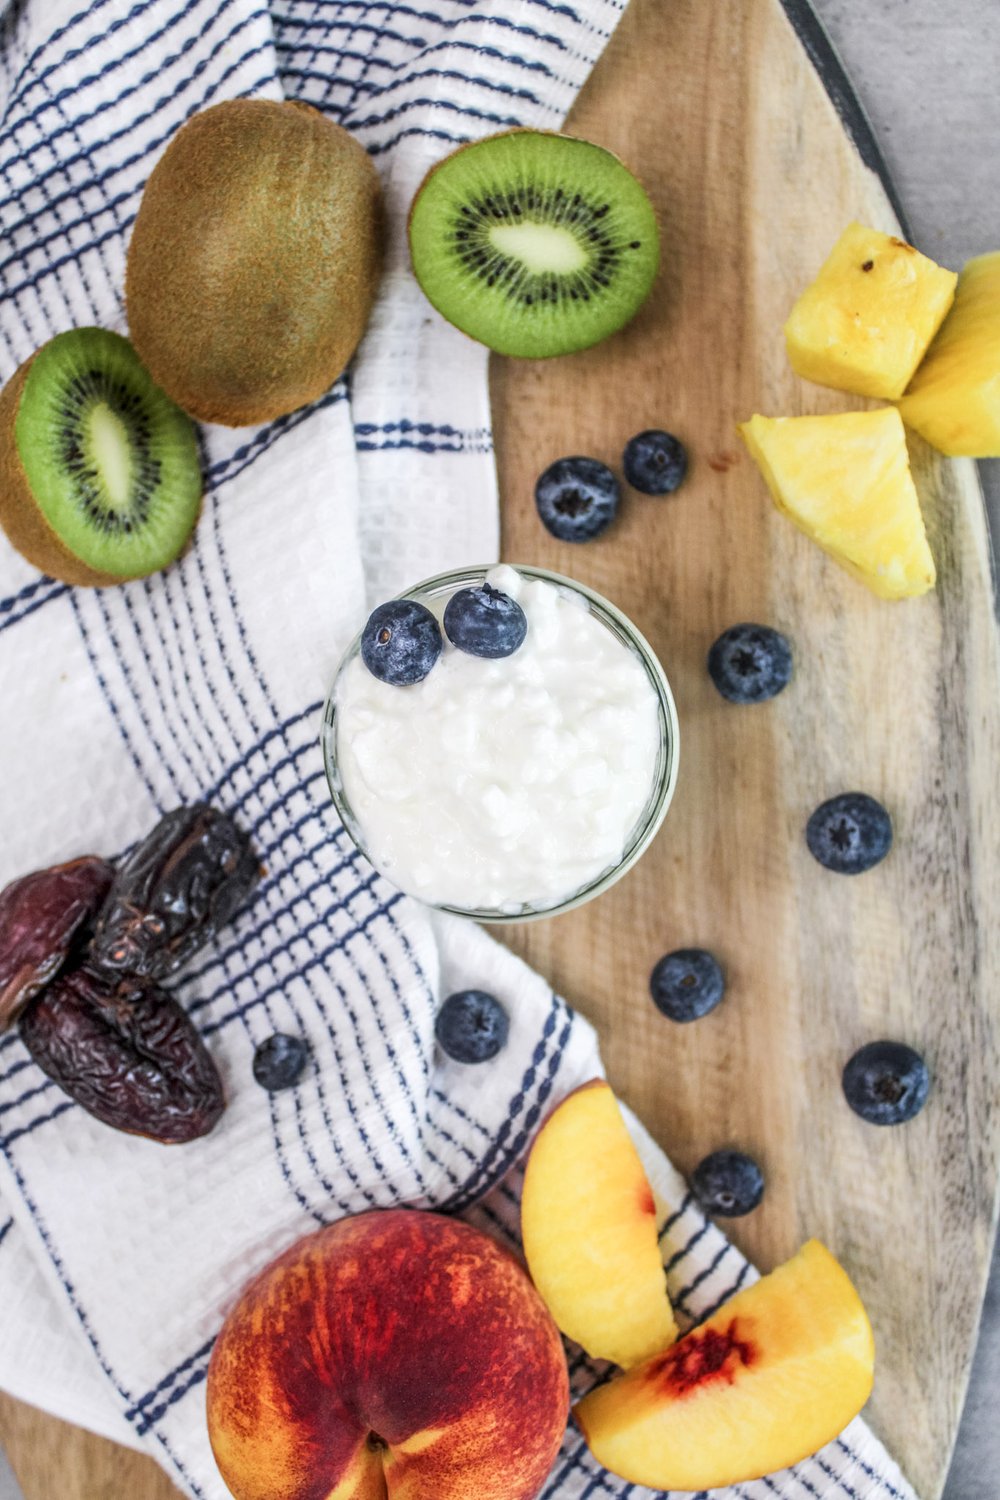 5 ways to eat cottage cheese and fruit